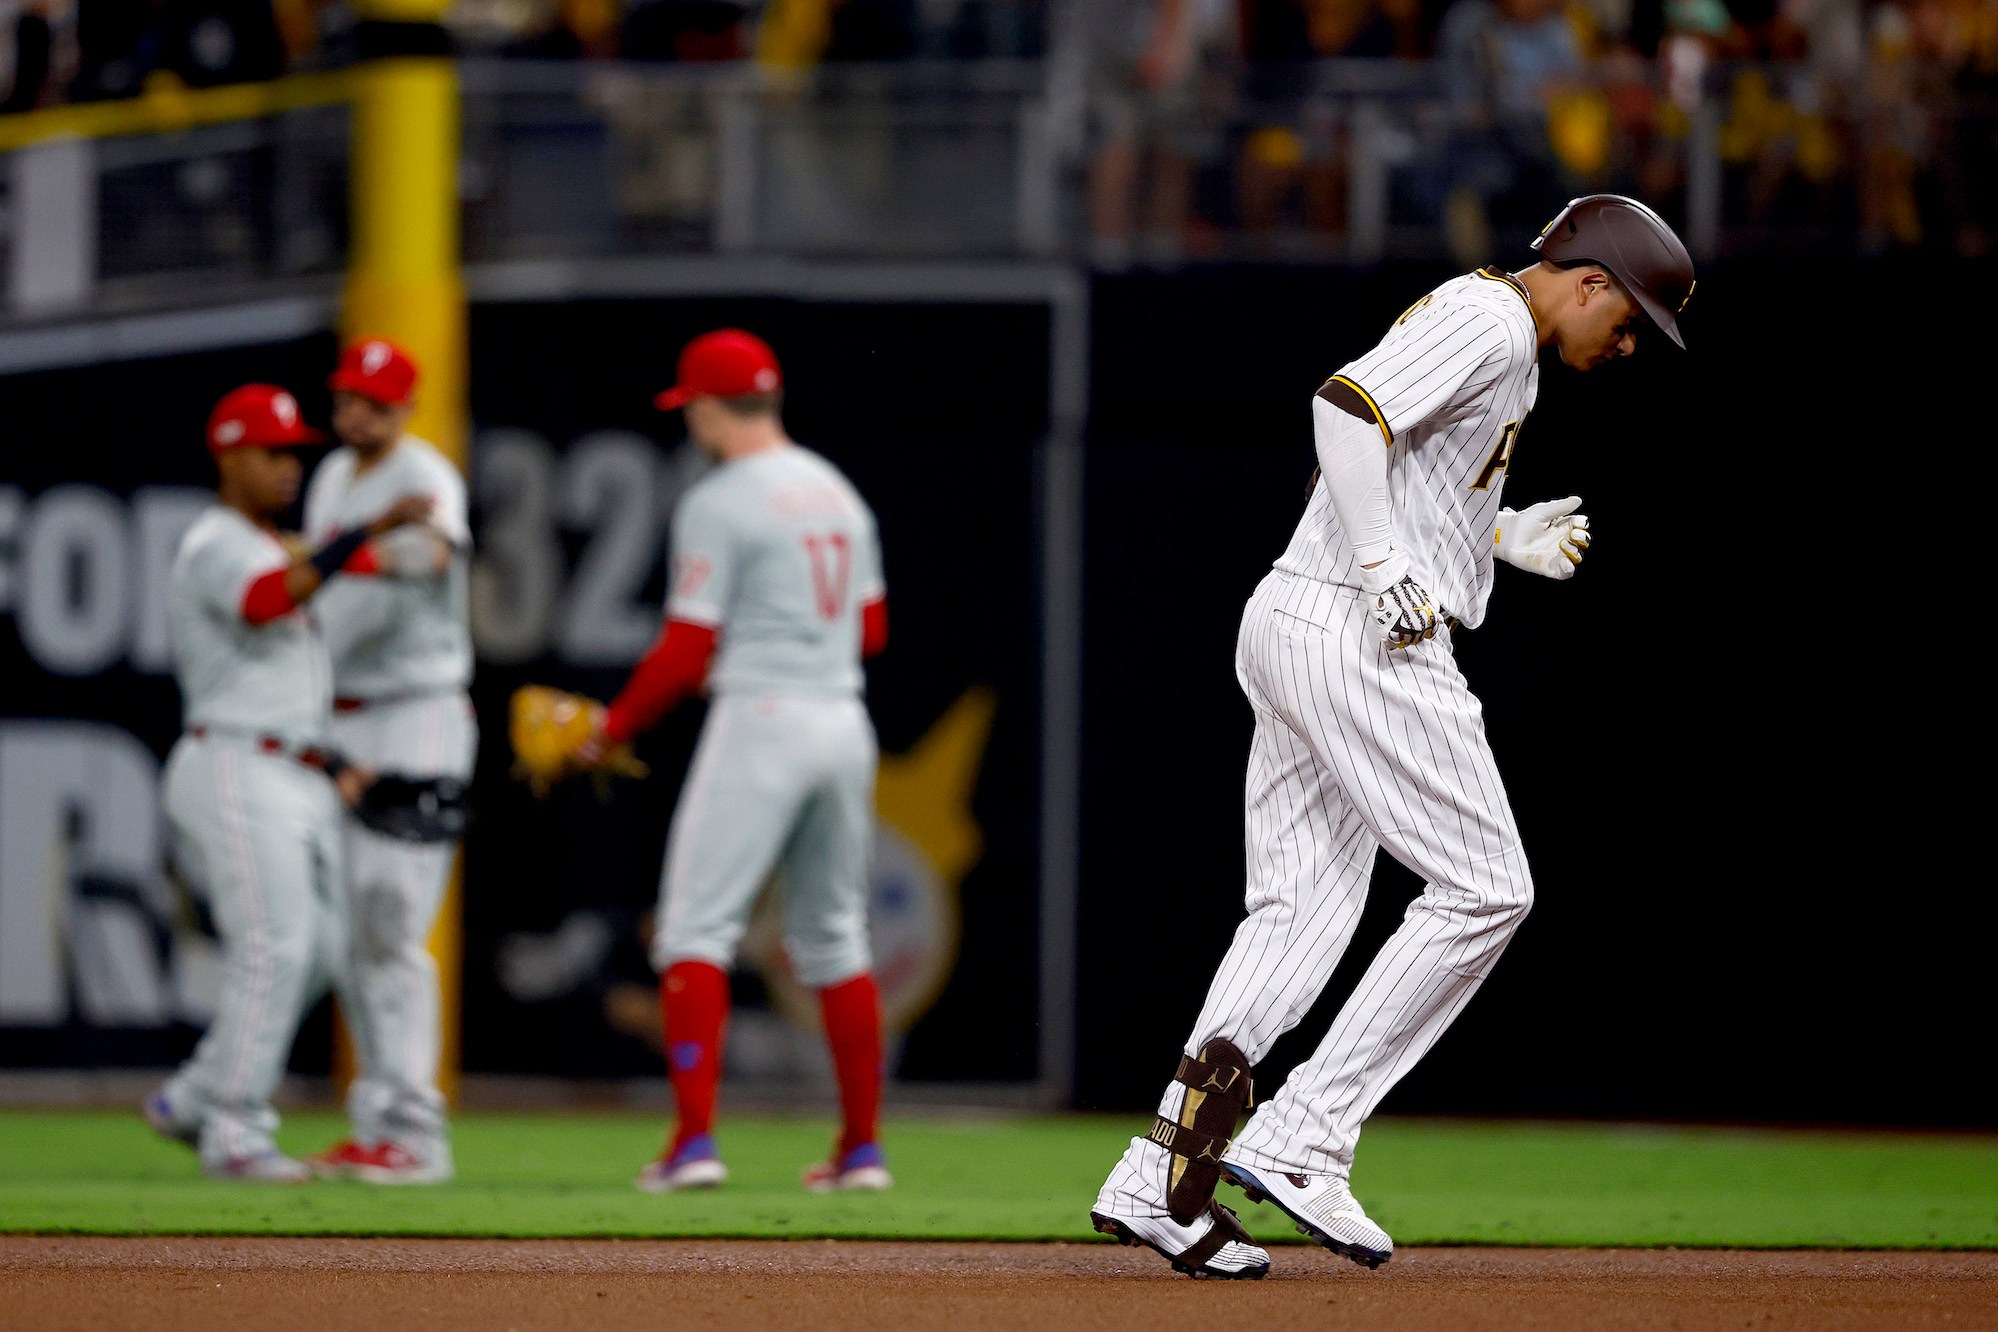 SAN DIEGO, CALIFORNIA - OCTOBER 18: Manny Machado #13 of the San Diego Padres reacts after flying out during the seventh inning against the Philadelphia Phillies in game one of the National League Championship Series at PETCO Park on October 18, 2022 in San Diego, California. (Photo by Ronald Martinez/Getty Images)